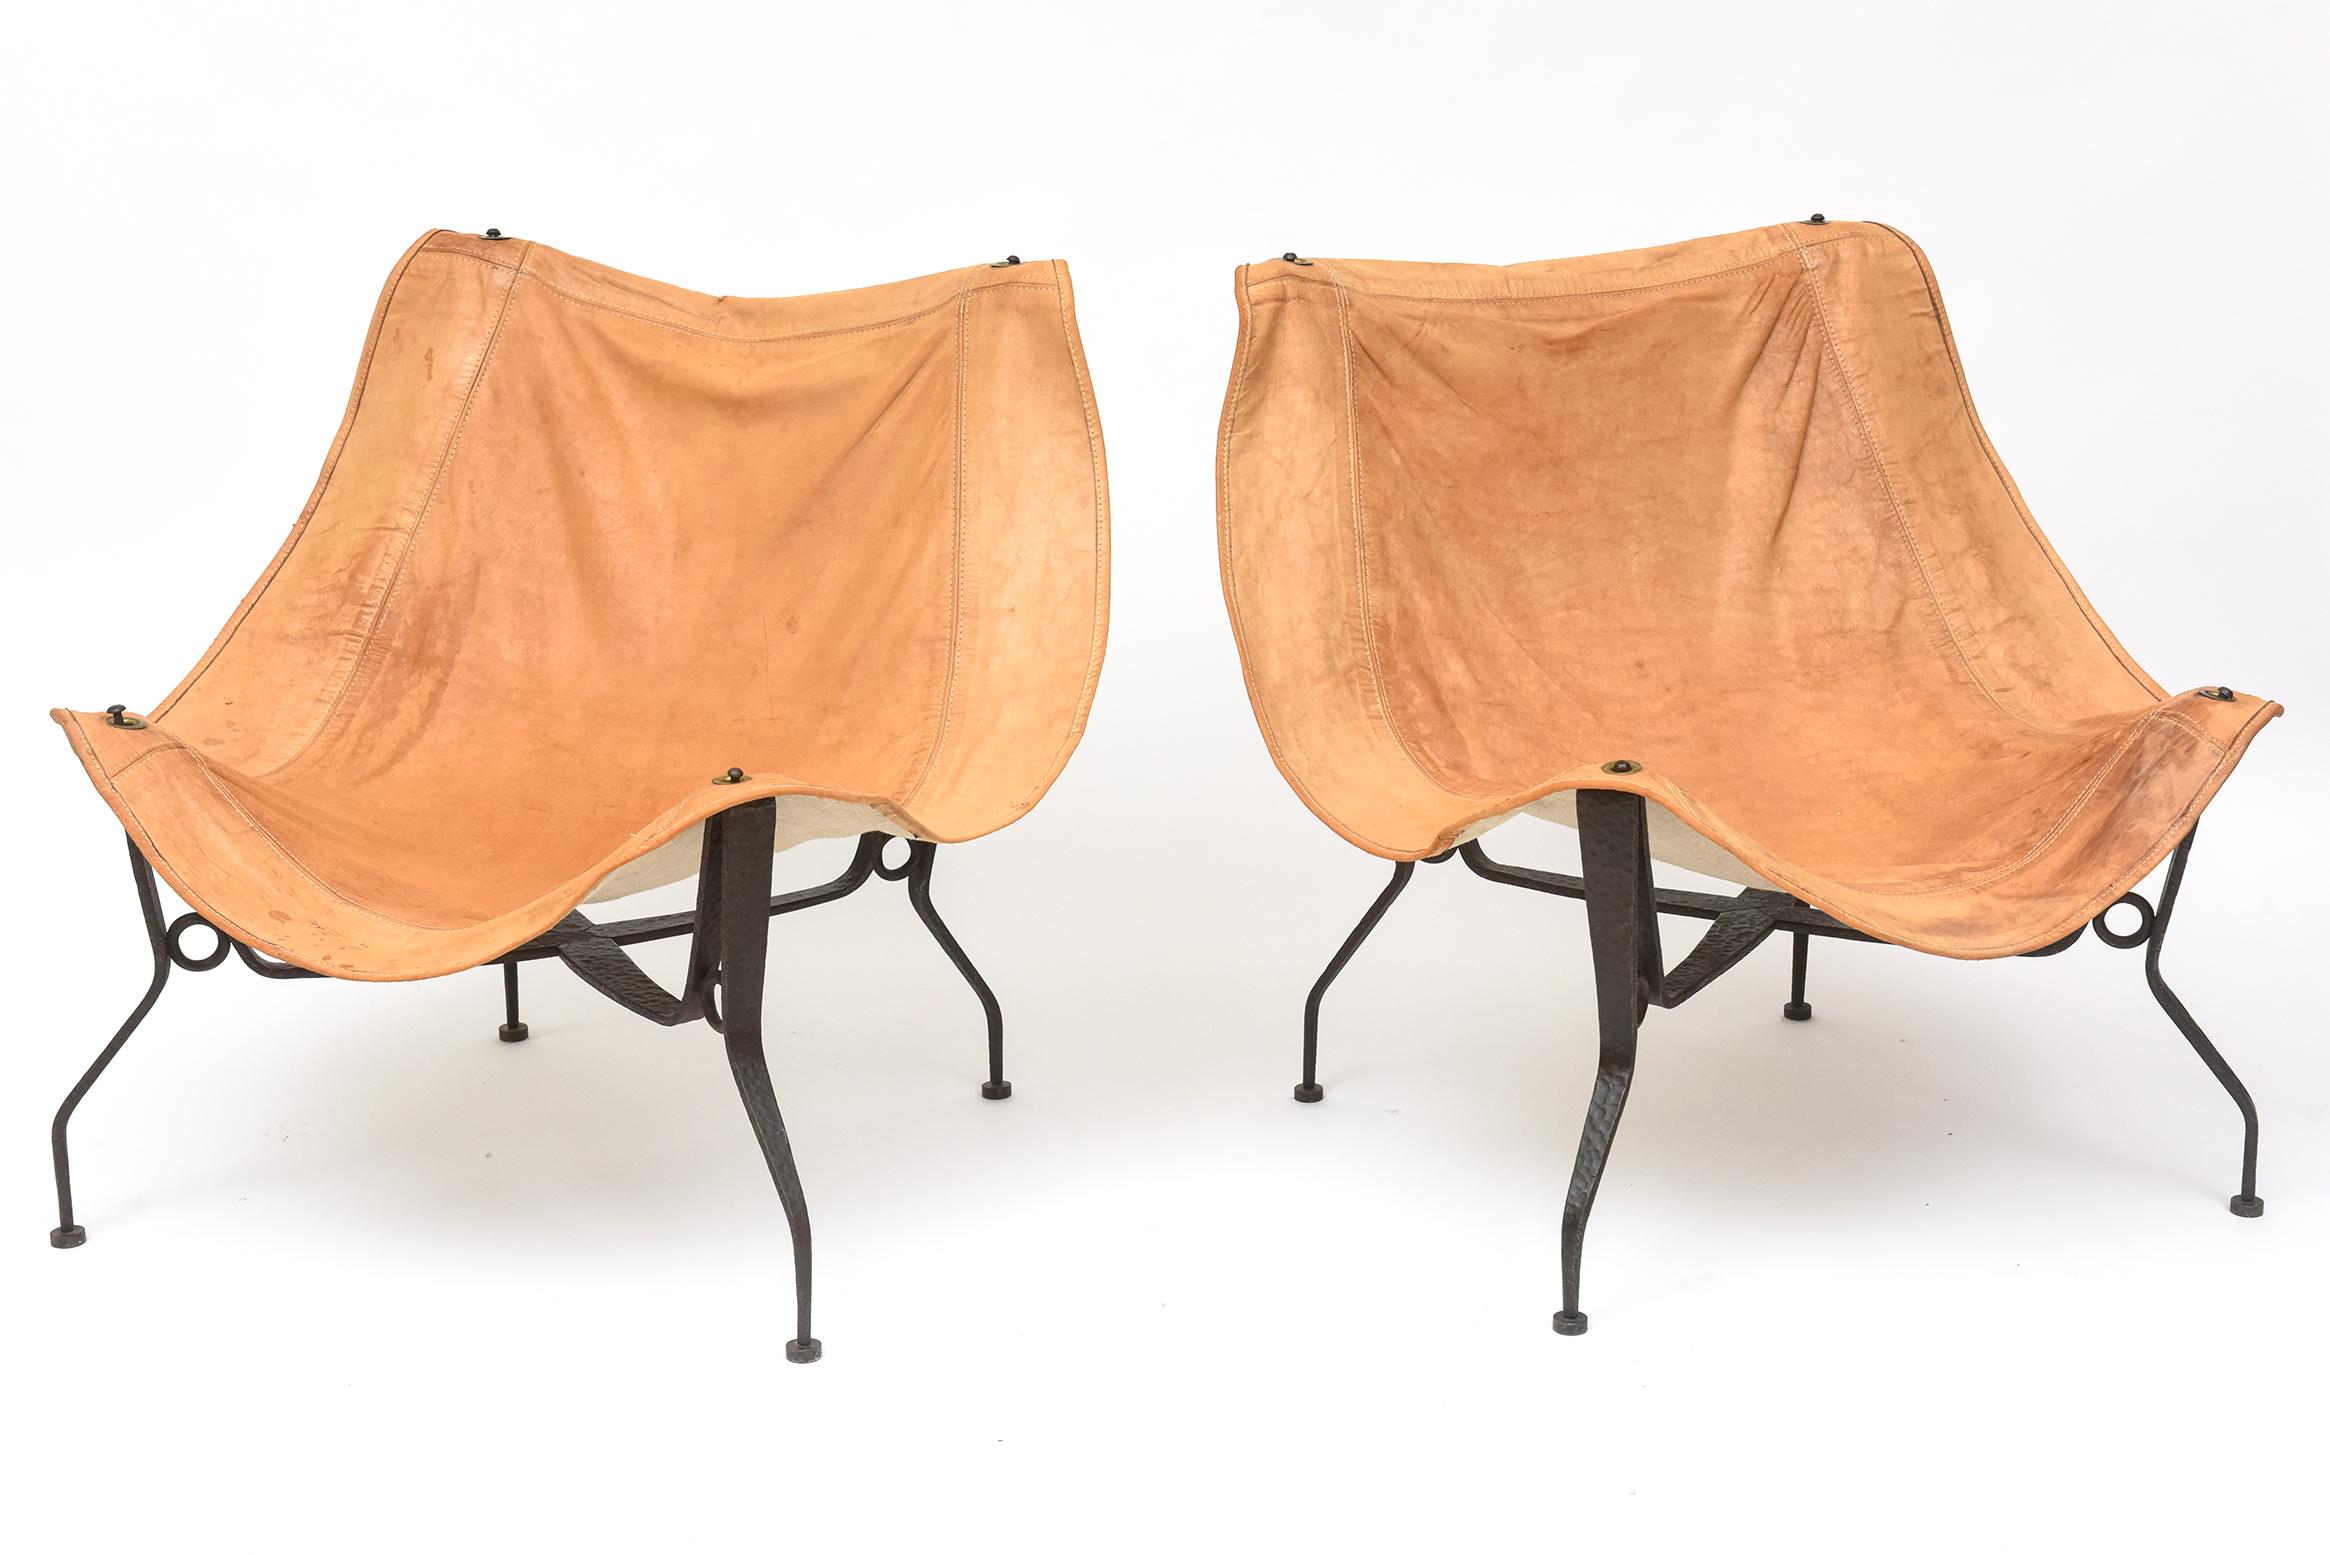 Artful wrought iron frames give these 1960s sling chairs a more polished look than most, while the softly worn, canvas-backed leather ensures their comfort.